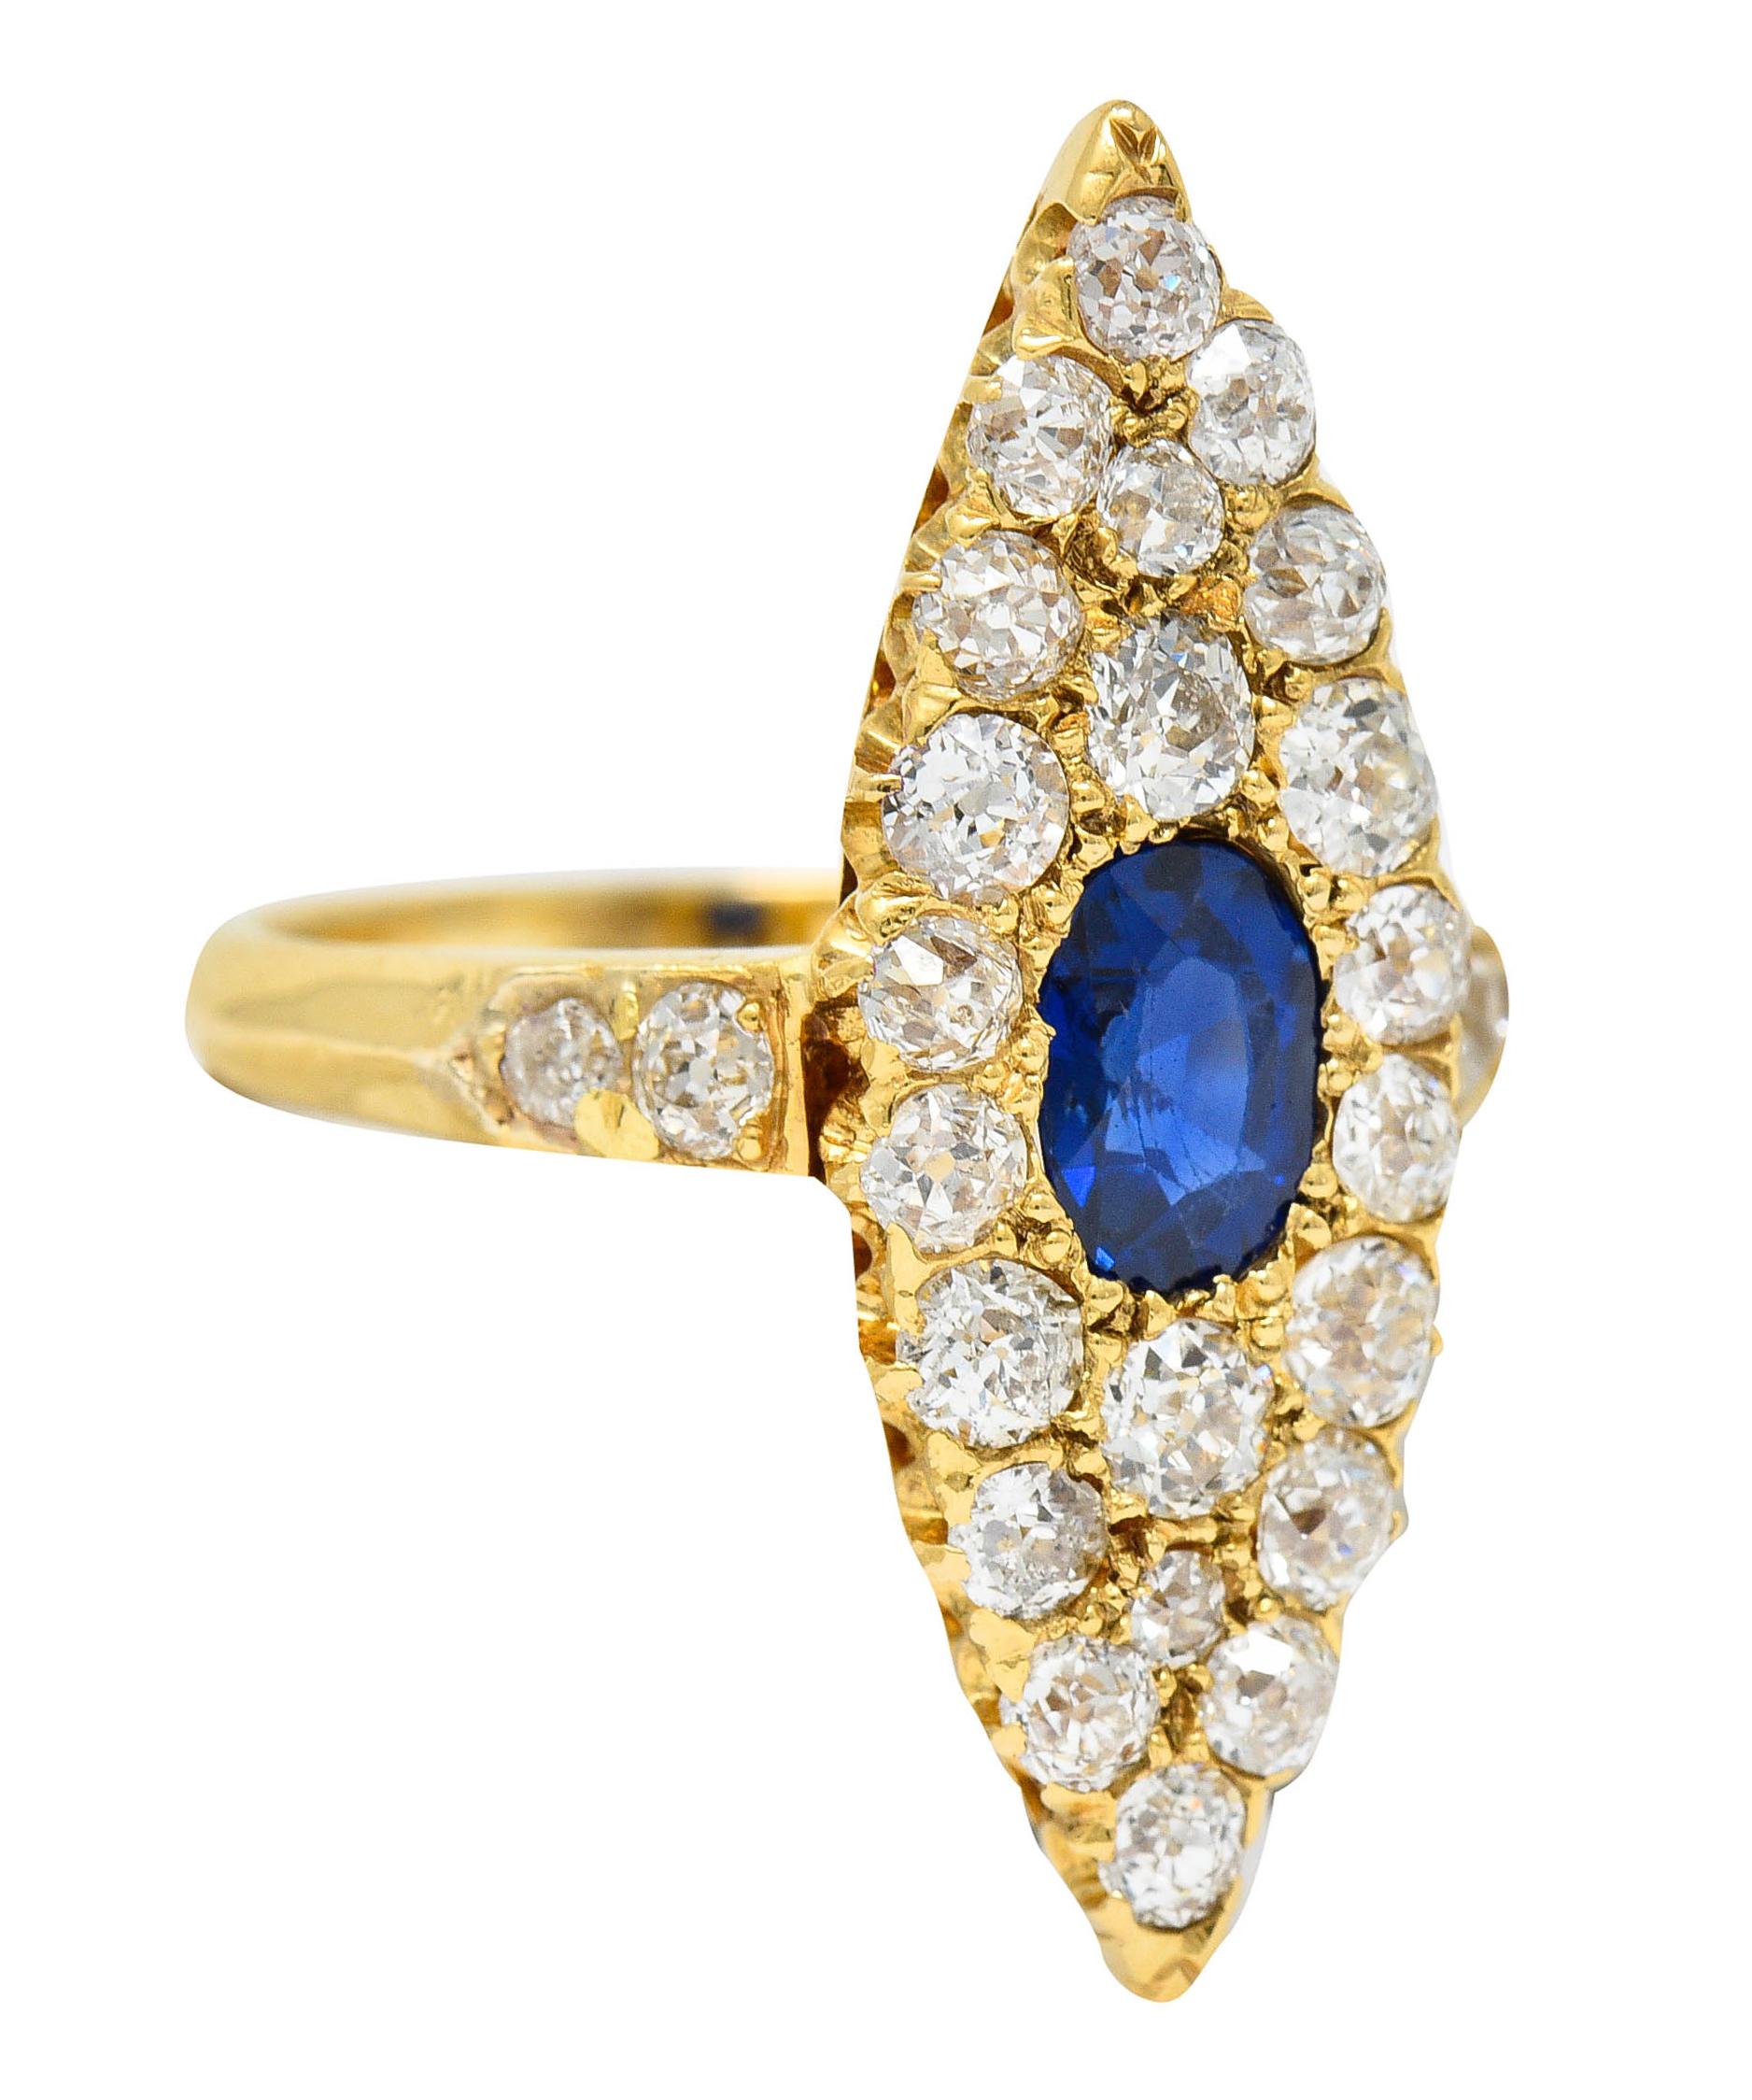 Navette shaped cluster ring centers an oval cut sapphire

Weighing approximately 0.62 carat with medium dark royal blue color

Surrounded by old mine cut diamonds weighing in total approximately 1.46 carats - G to J color with SI clarity

Tested as